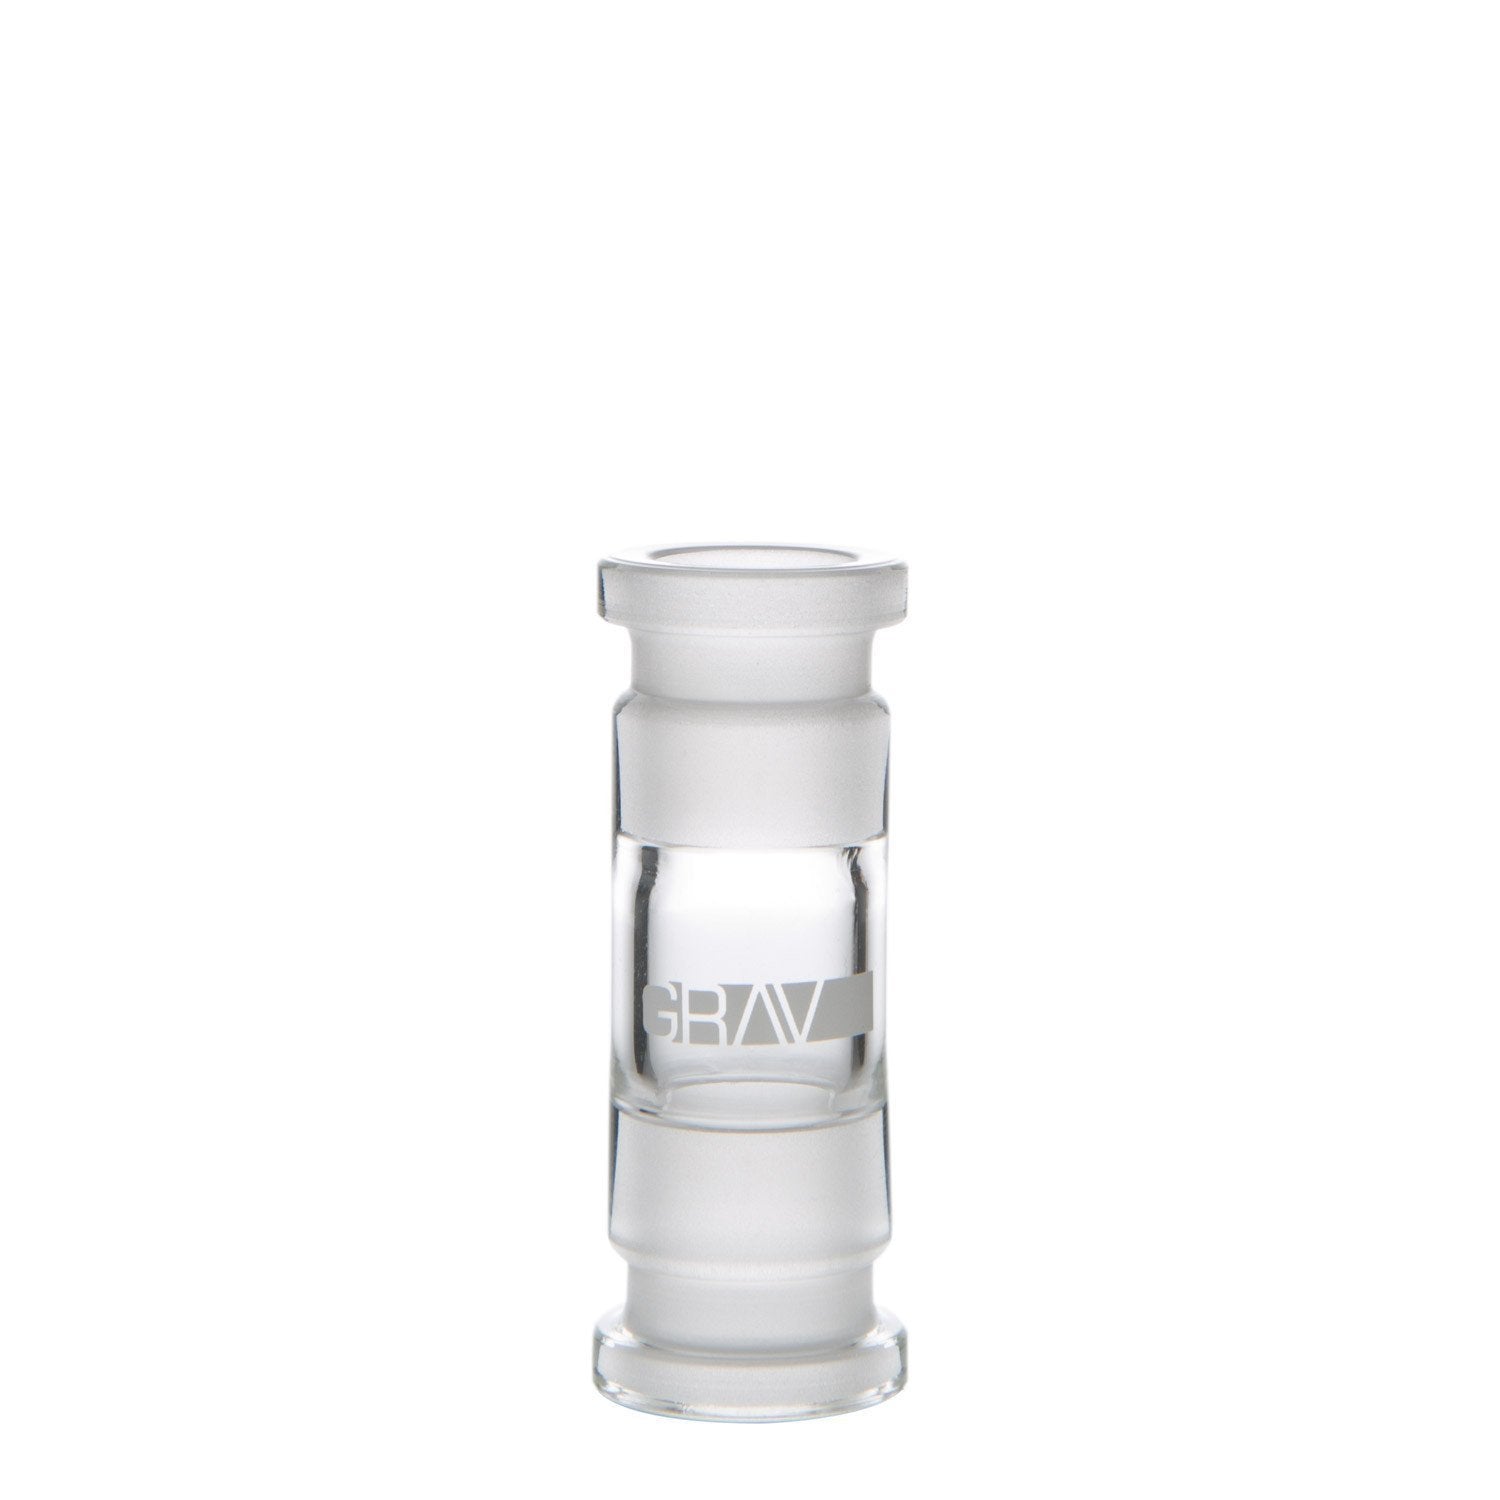 GRAV Female to Female Adaptor - 14mm or 19mm - 420 Science - The most trusted online smoke shop.